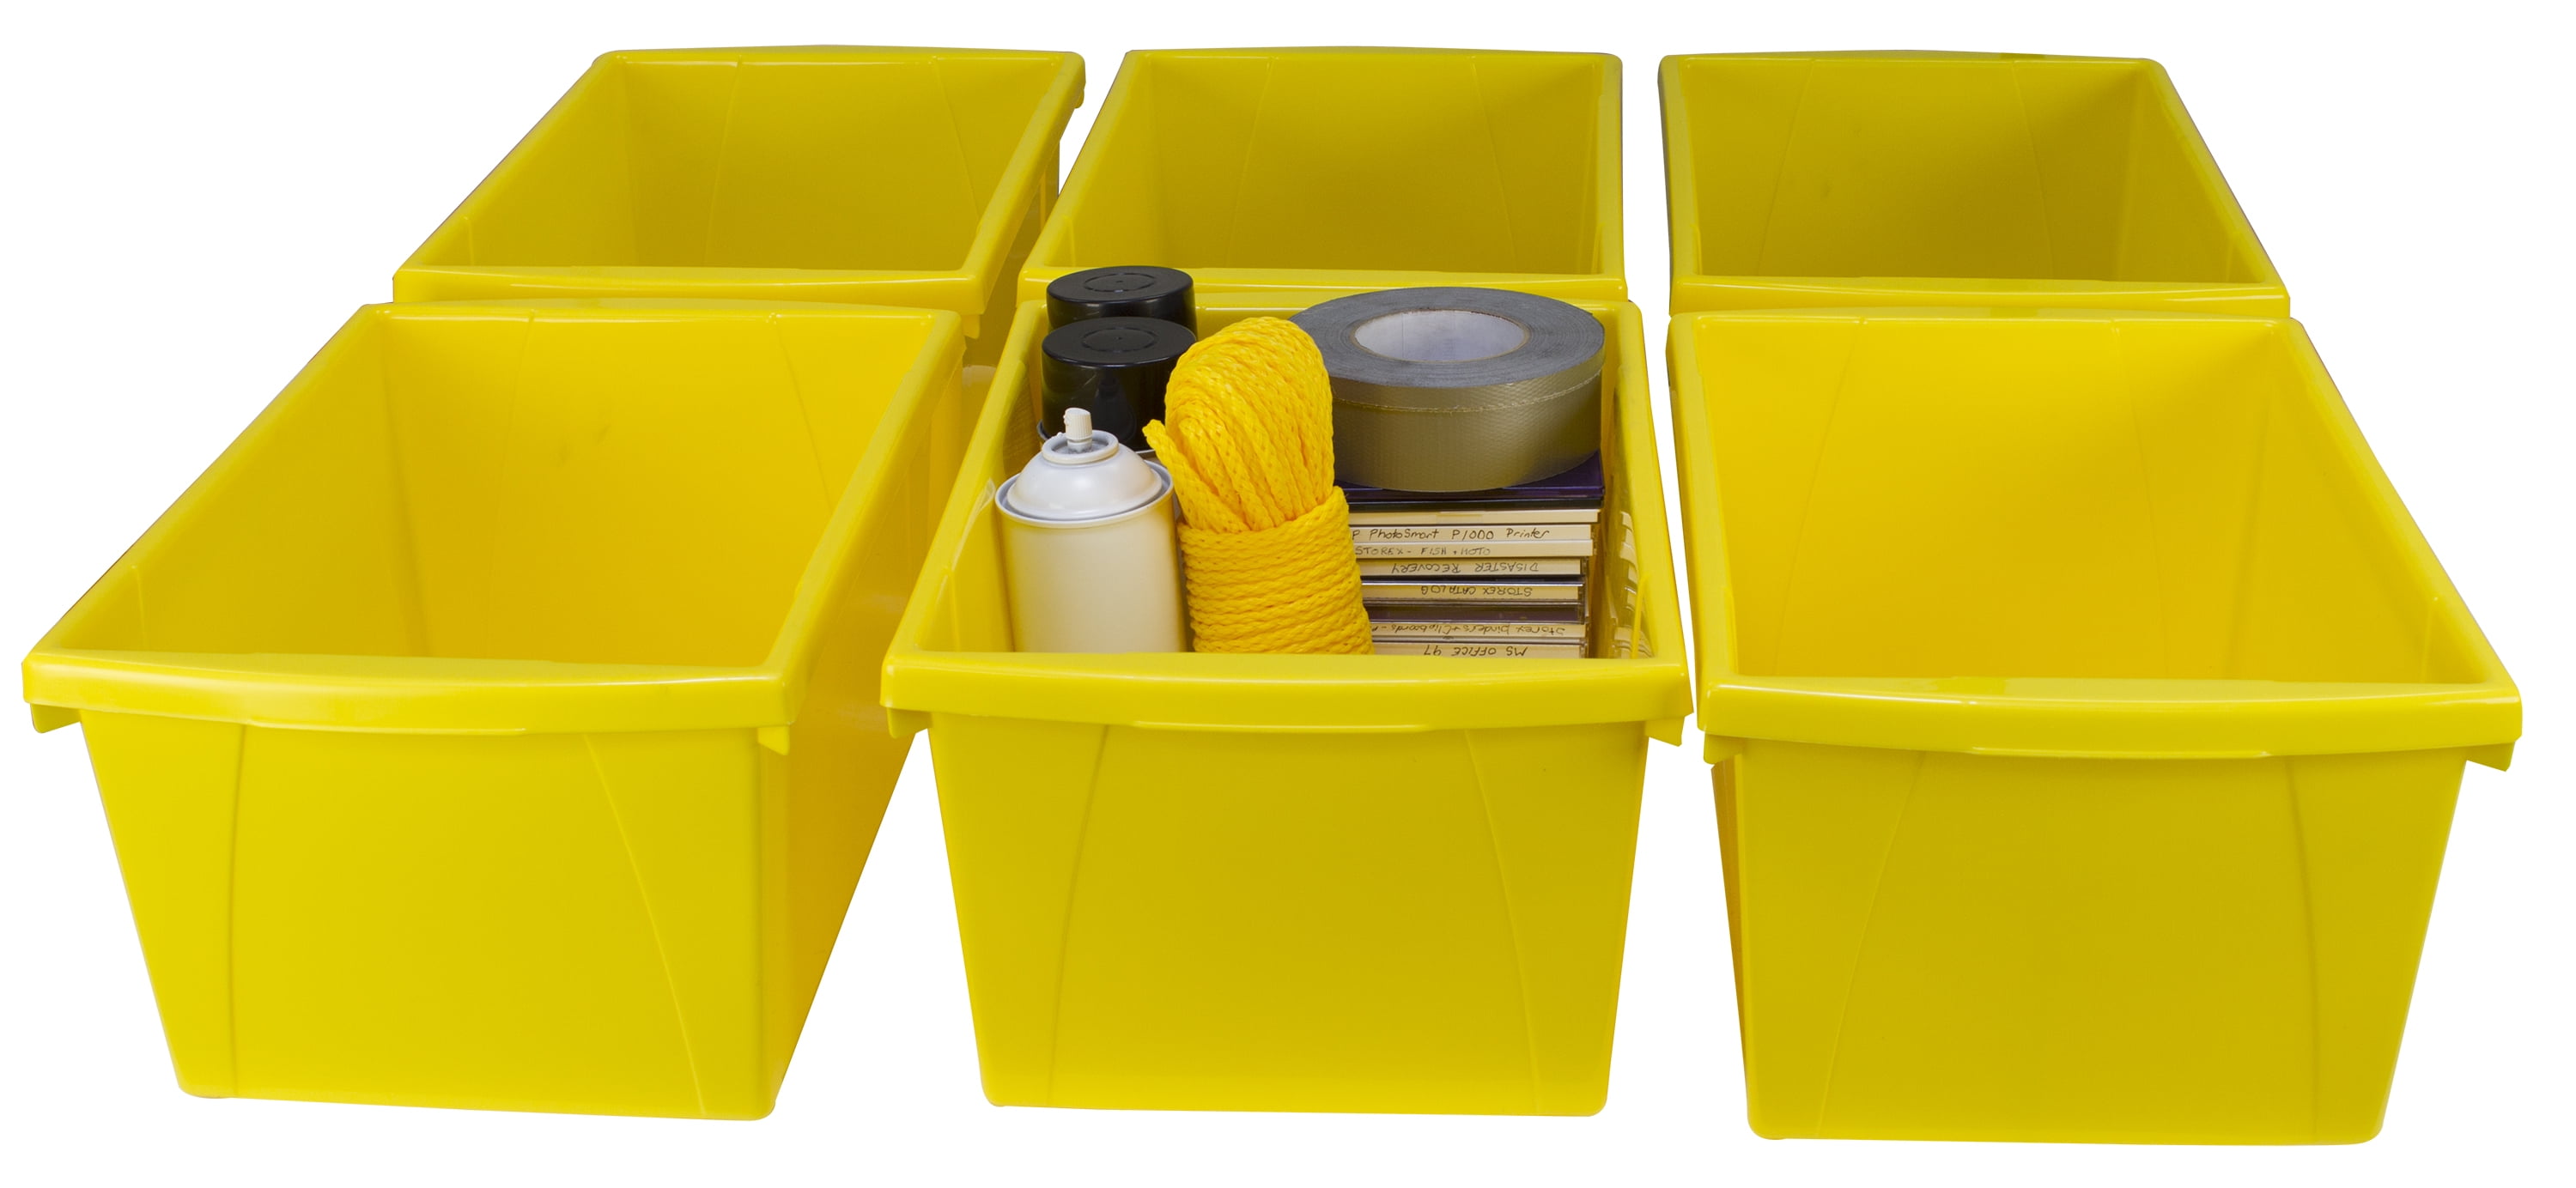 Centrex Plastics 5 Gal. Storage Bin with Snap Fit Lid, Black/Yellow  (6-Pack) 540013-6 - The Home Depot